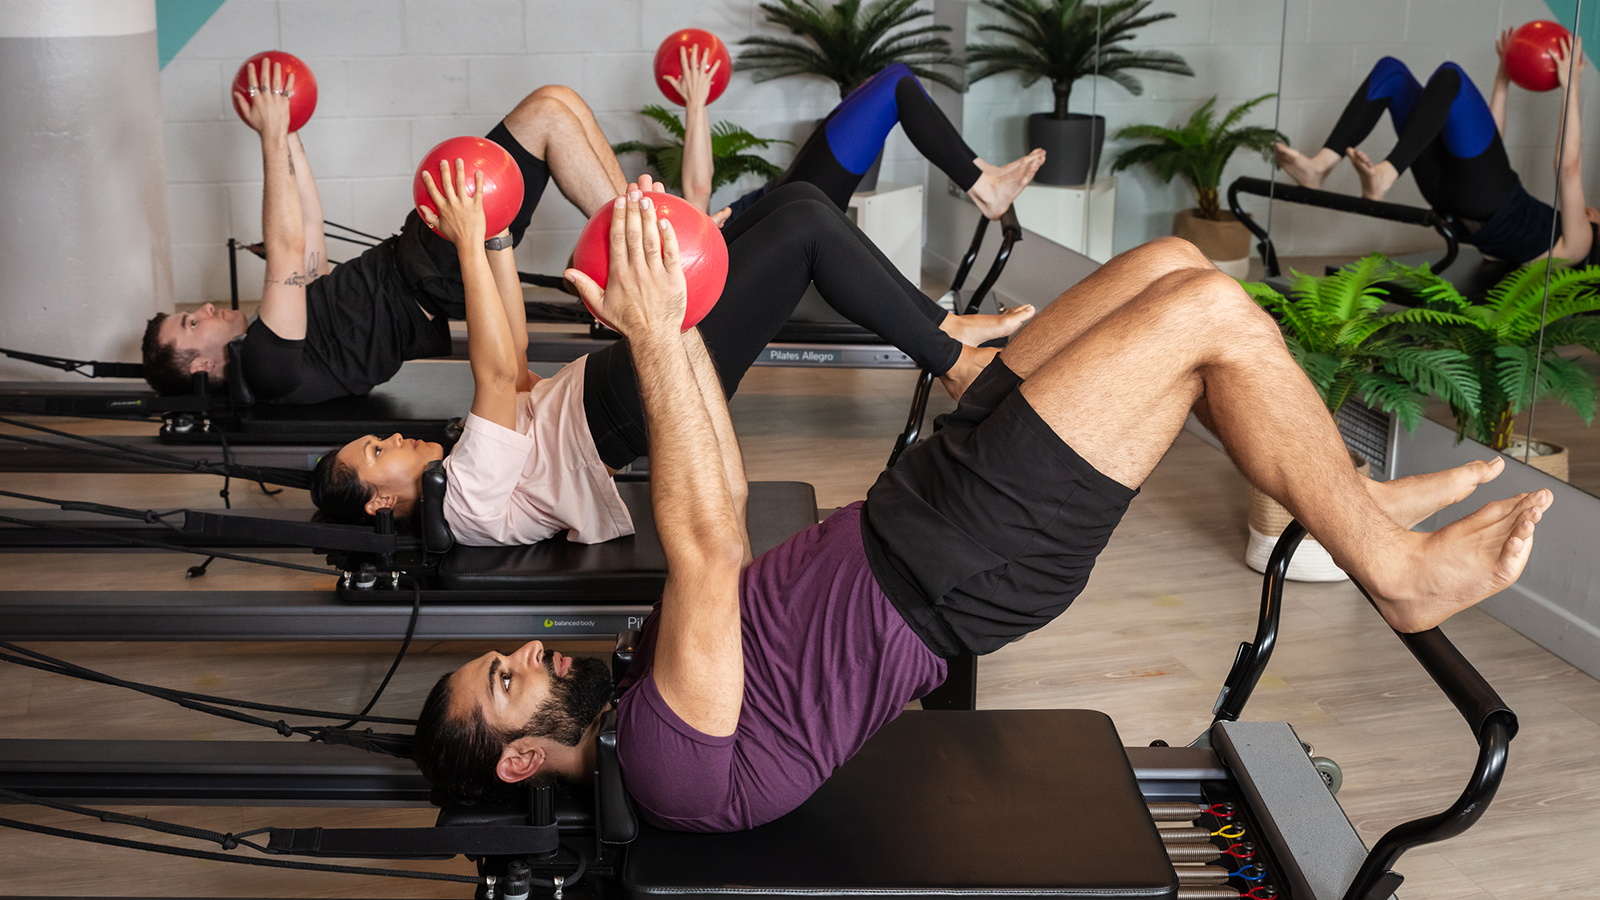 What to expect from a Reformer Pilates class